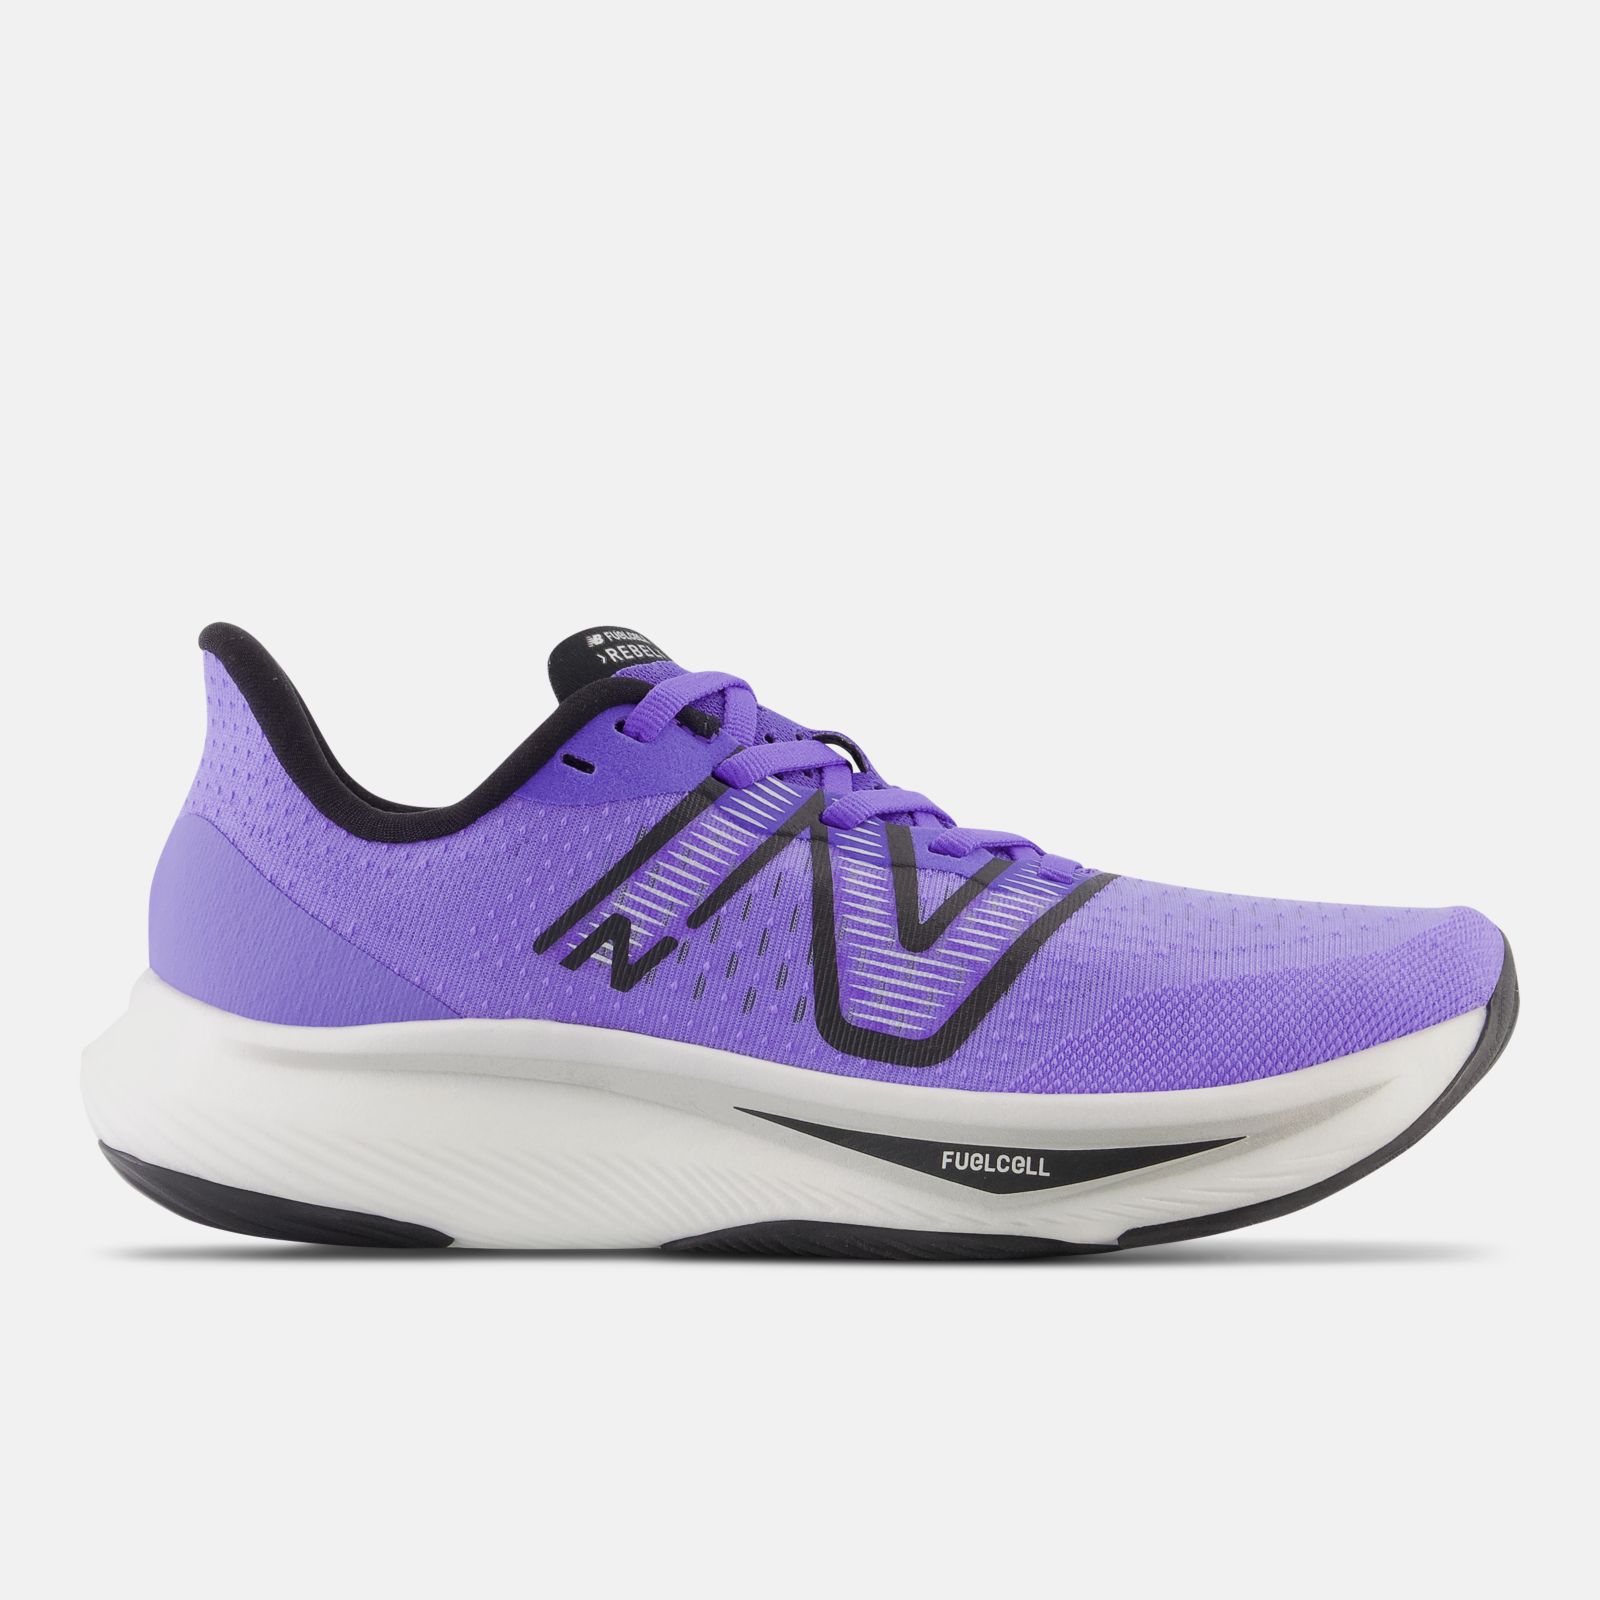 New Balance FuelCell Rebel v3, Electric indigo, swatch